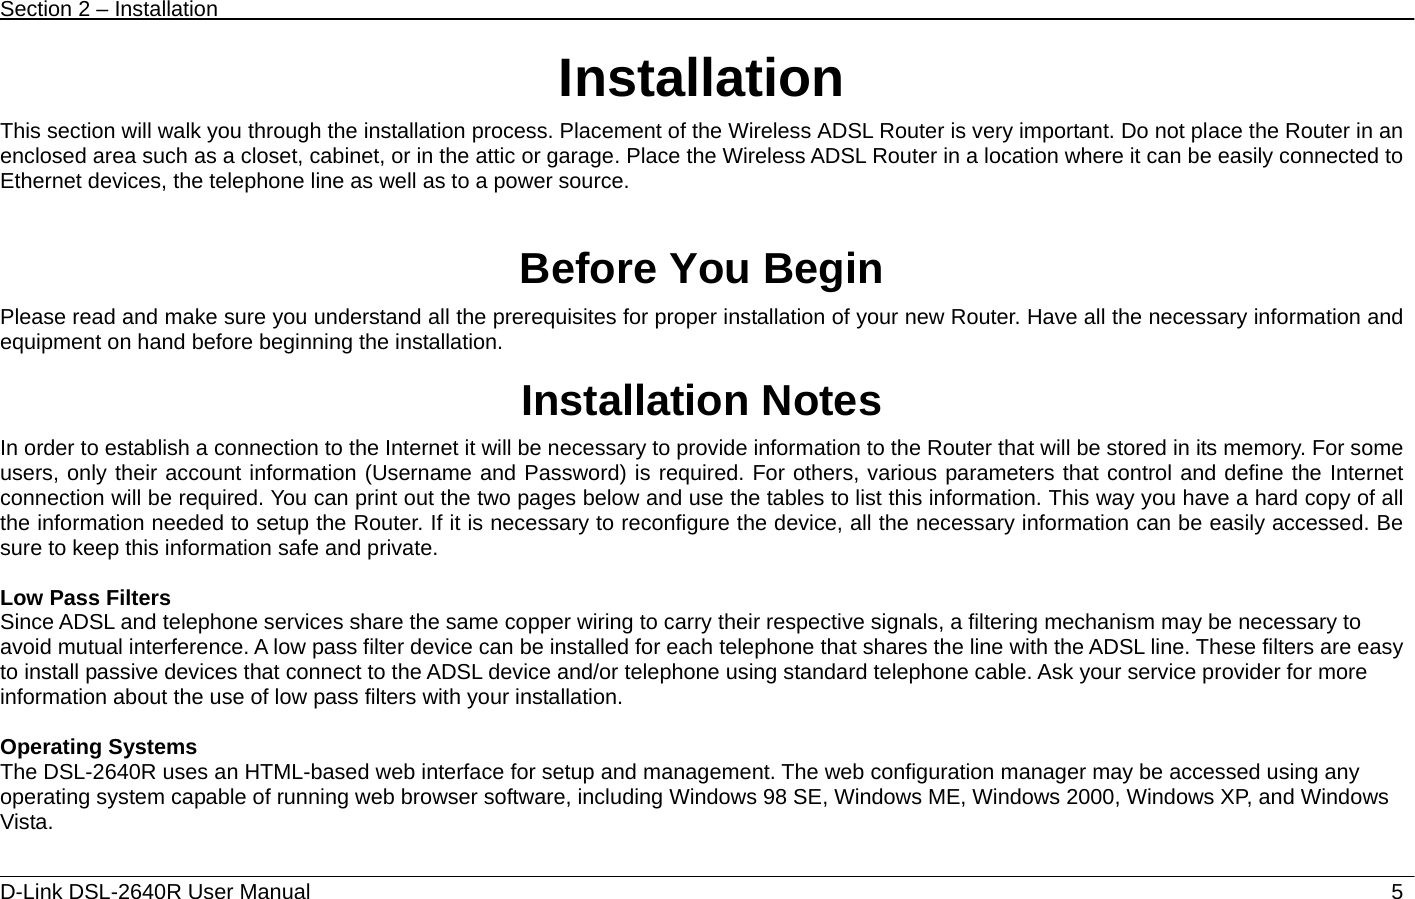 Section 2 – Installation   D-Link DSL-2640R User Manual                            5Installation This section will walk you through the installation process. Placement of the Wireless ADSL Router is very important. Do not place the Router in an enclosed area such as a closet, cabinet, or in the attic or garage. Place the Wireless ADSL Router in a location where it can be easily connected to Ethernet devices, the telephone line as well as to a power source.   Before You Begin Please read and make sure you understand all the prerequisites for proper installation of your new Router. Have all the necessary information and equipment on hand before beginning the installation.  Installation Notes In order to establish a connection to the Internet it will be necessary to provide information to the Router that will be stored in its memory. For some users, only their account information (Username and Password) is required. For others, various parameters that control and define the Internet connection will be required. You can print out the two pages below and use the tables to list this information. This way you have a hard copy of all the information needed to setup the Router. If it is necessary to reconfigure the device, all the necessary information can be easily accessed. Be sure to keep this information safe and private.  Low Pass Filters Since ADSL and telephone services share the same copper wiring to carry their respective signals, a filtering mechanism may be necessary to avoid mutual interference. A low pass filter device can be installed for each telephone that shares the line with the ADSL line. These filters are easy to install passive devices that connect to the ADSL device and/or telephone using standard telephone cable. Ask your service provider for more information about the use of low pass filters with your installation.    Operating Systems The DSL-2640R uses an HTML-based web interface for setup and management. The web configuration manager may be accessed using any operating system capable of running web browser software, including Windows 98 SE, Windows ME, Windows 2000, Windows XP, and Windows Vista.   